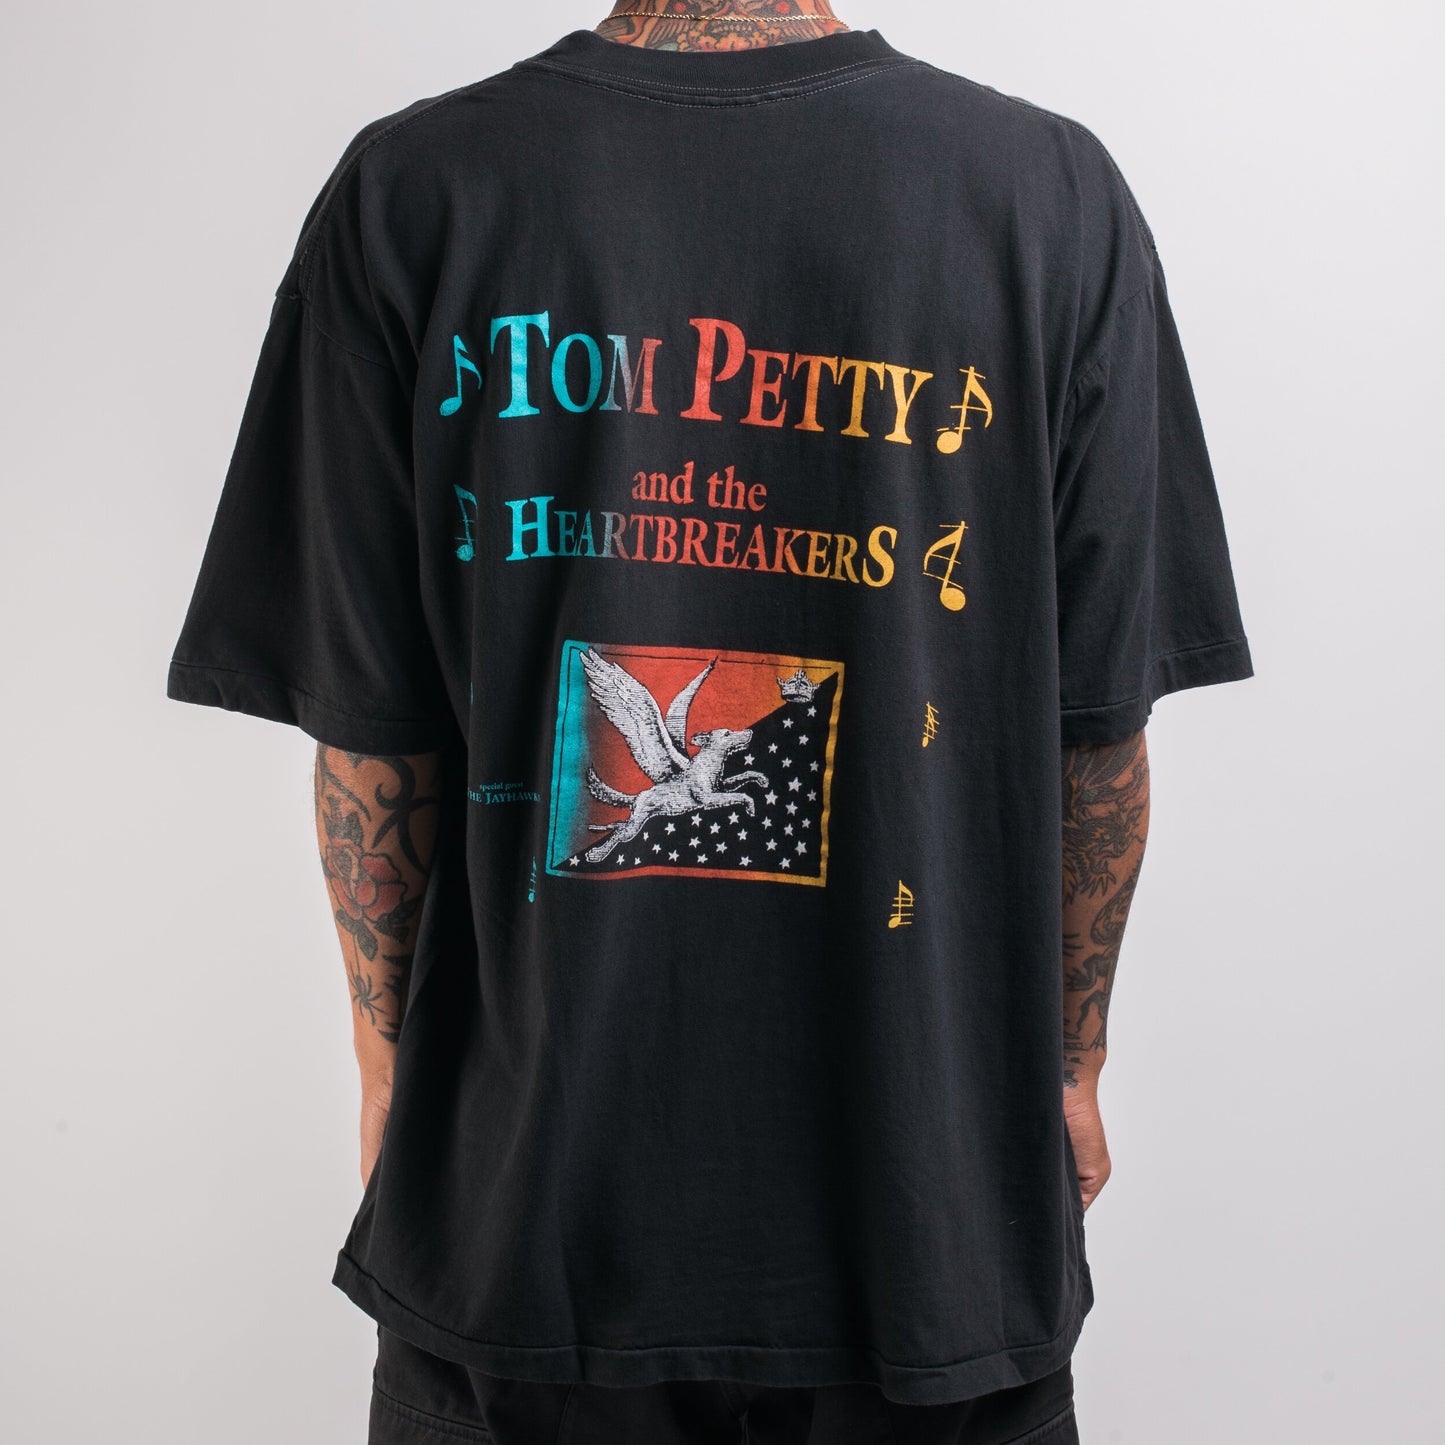 Vintage 90’s Tom Petty And The Heartbreakers T-Shirt